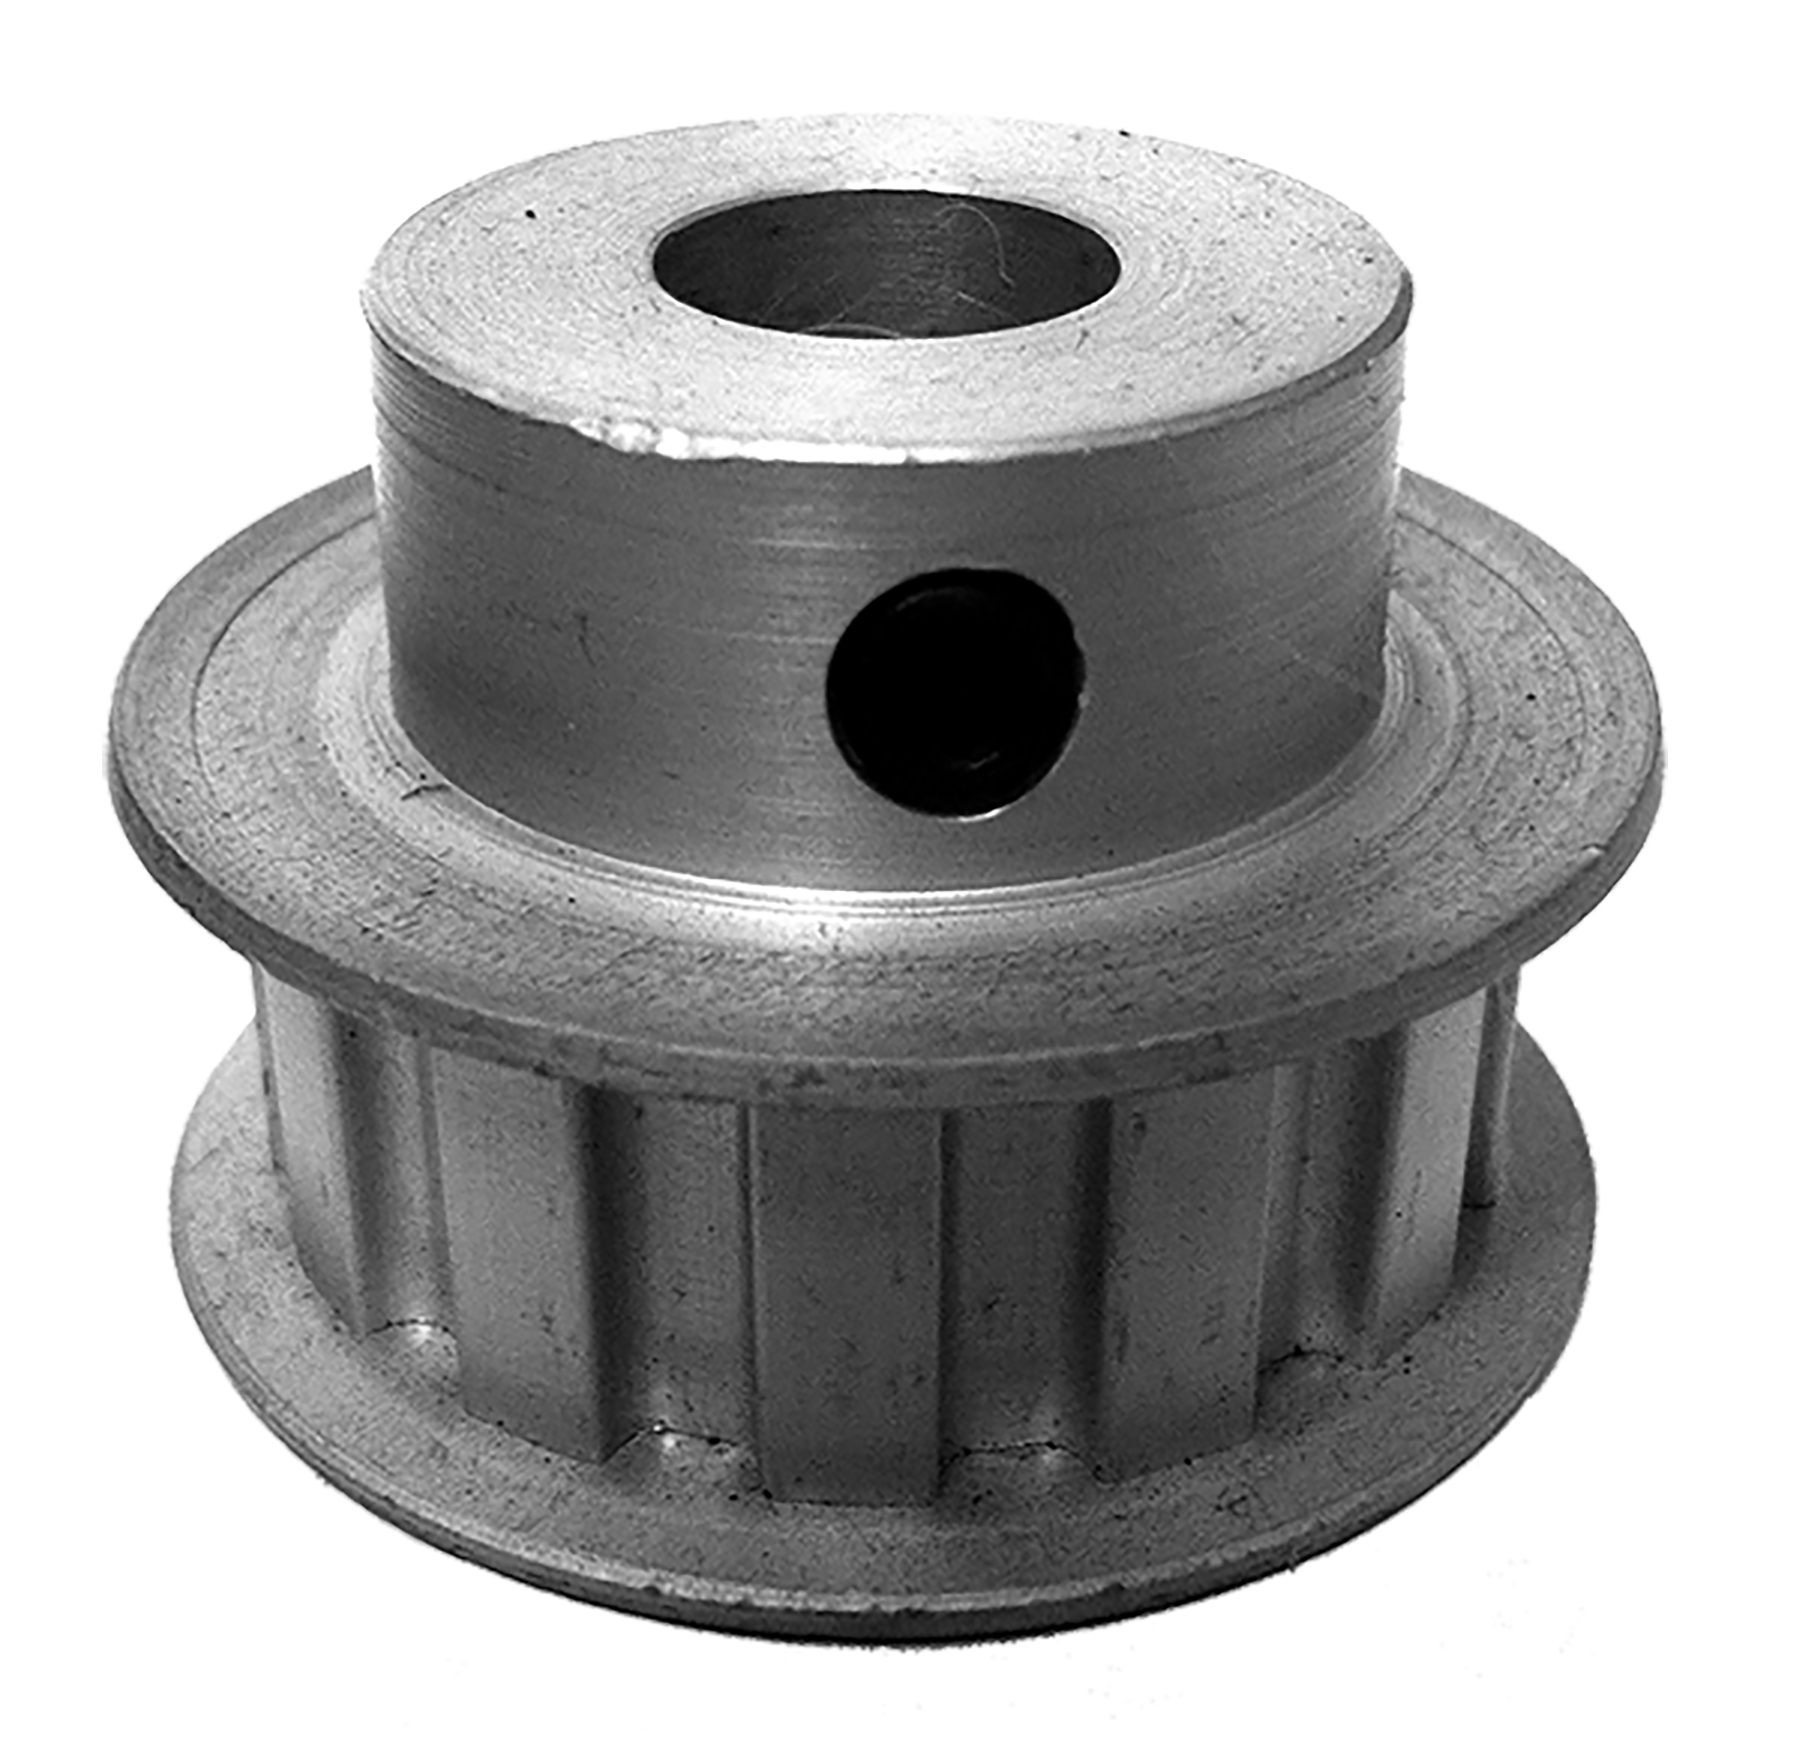 10L050-6FA6 - Aluminum Imperial Pitch Pulleys